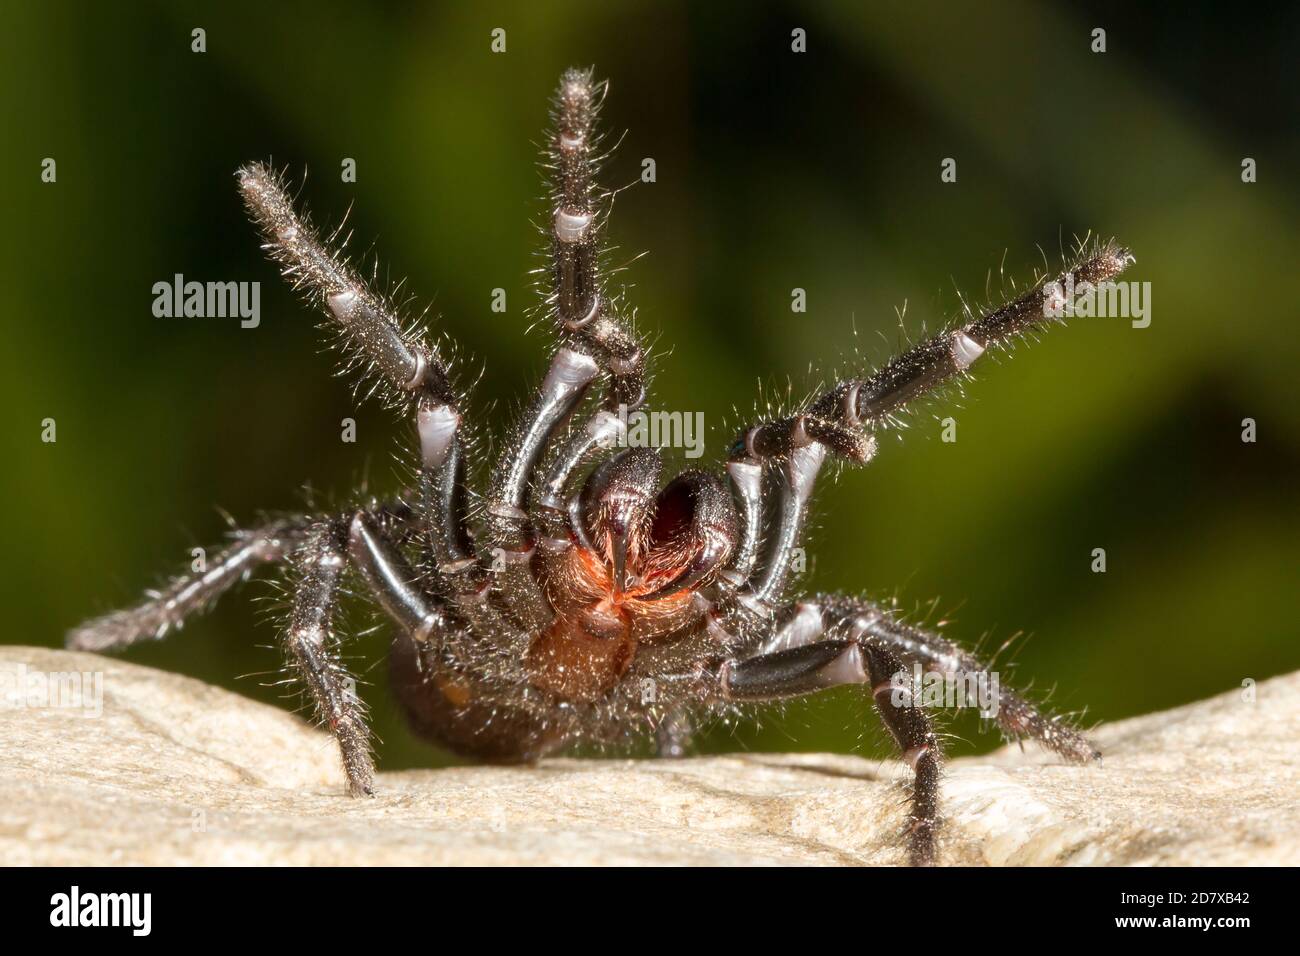 Sydney Funnel-web Spider in defensive stance Stock Photo